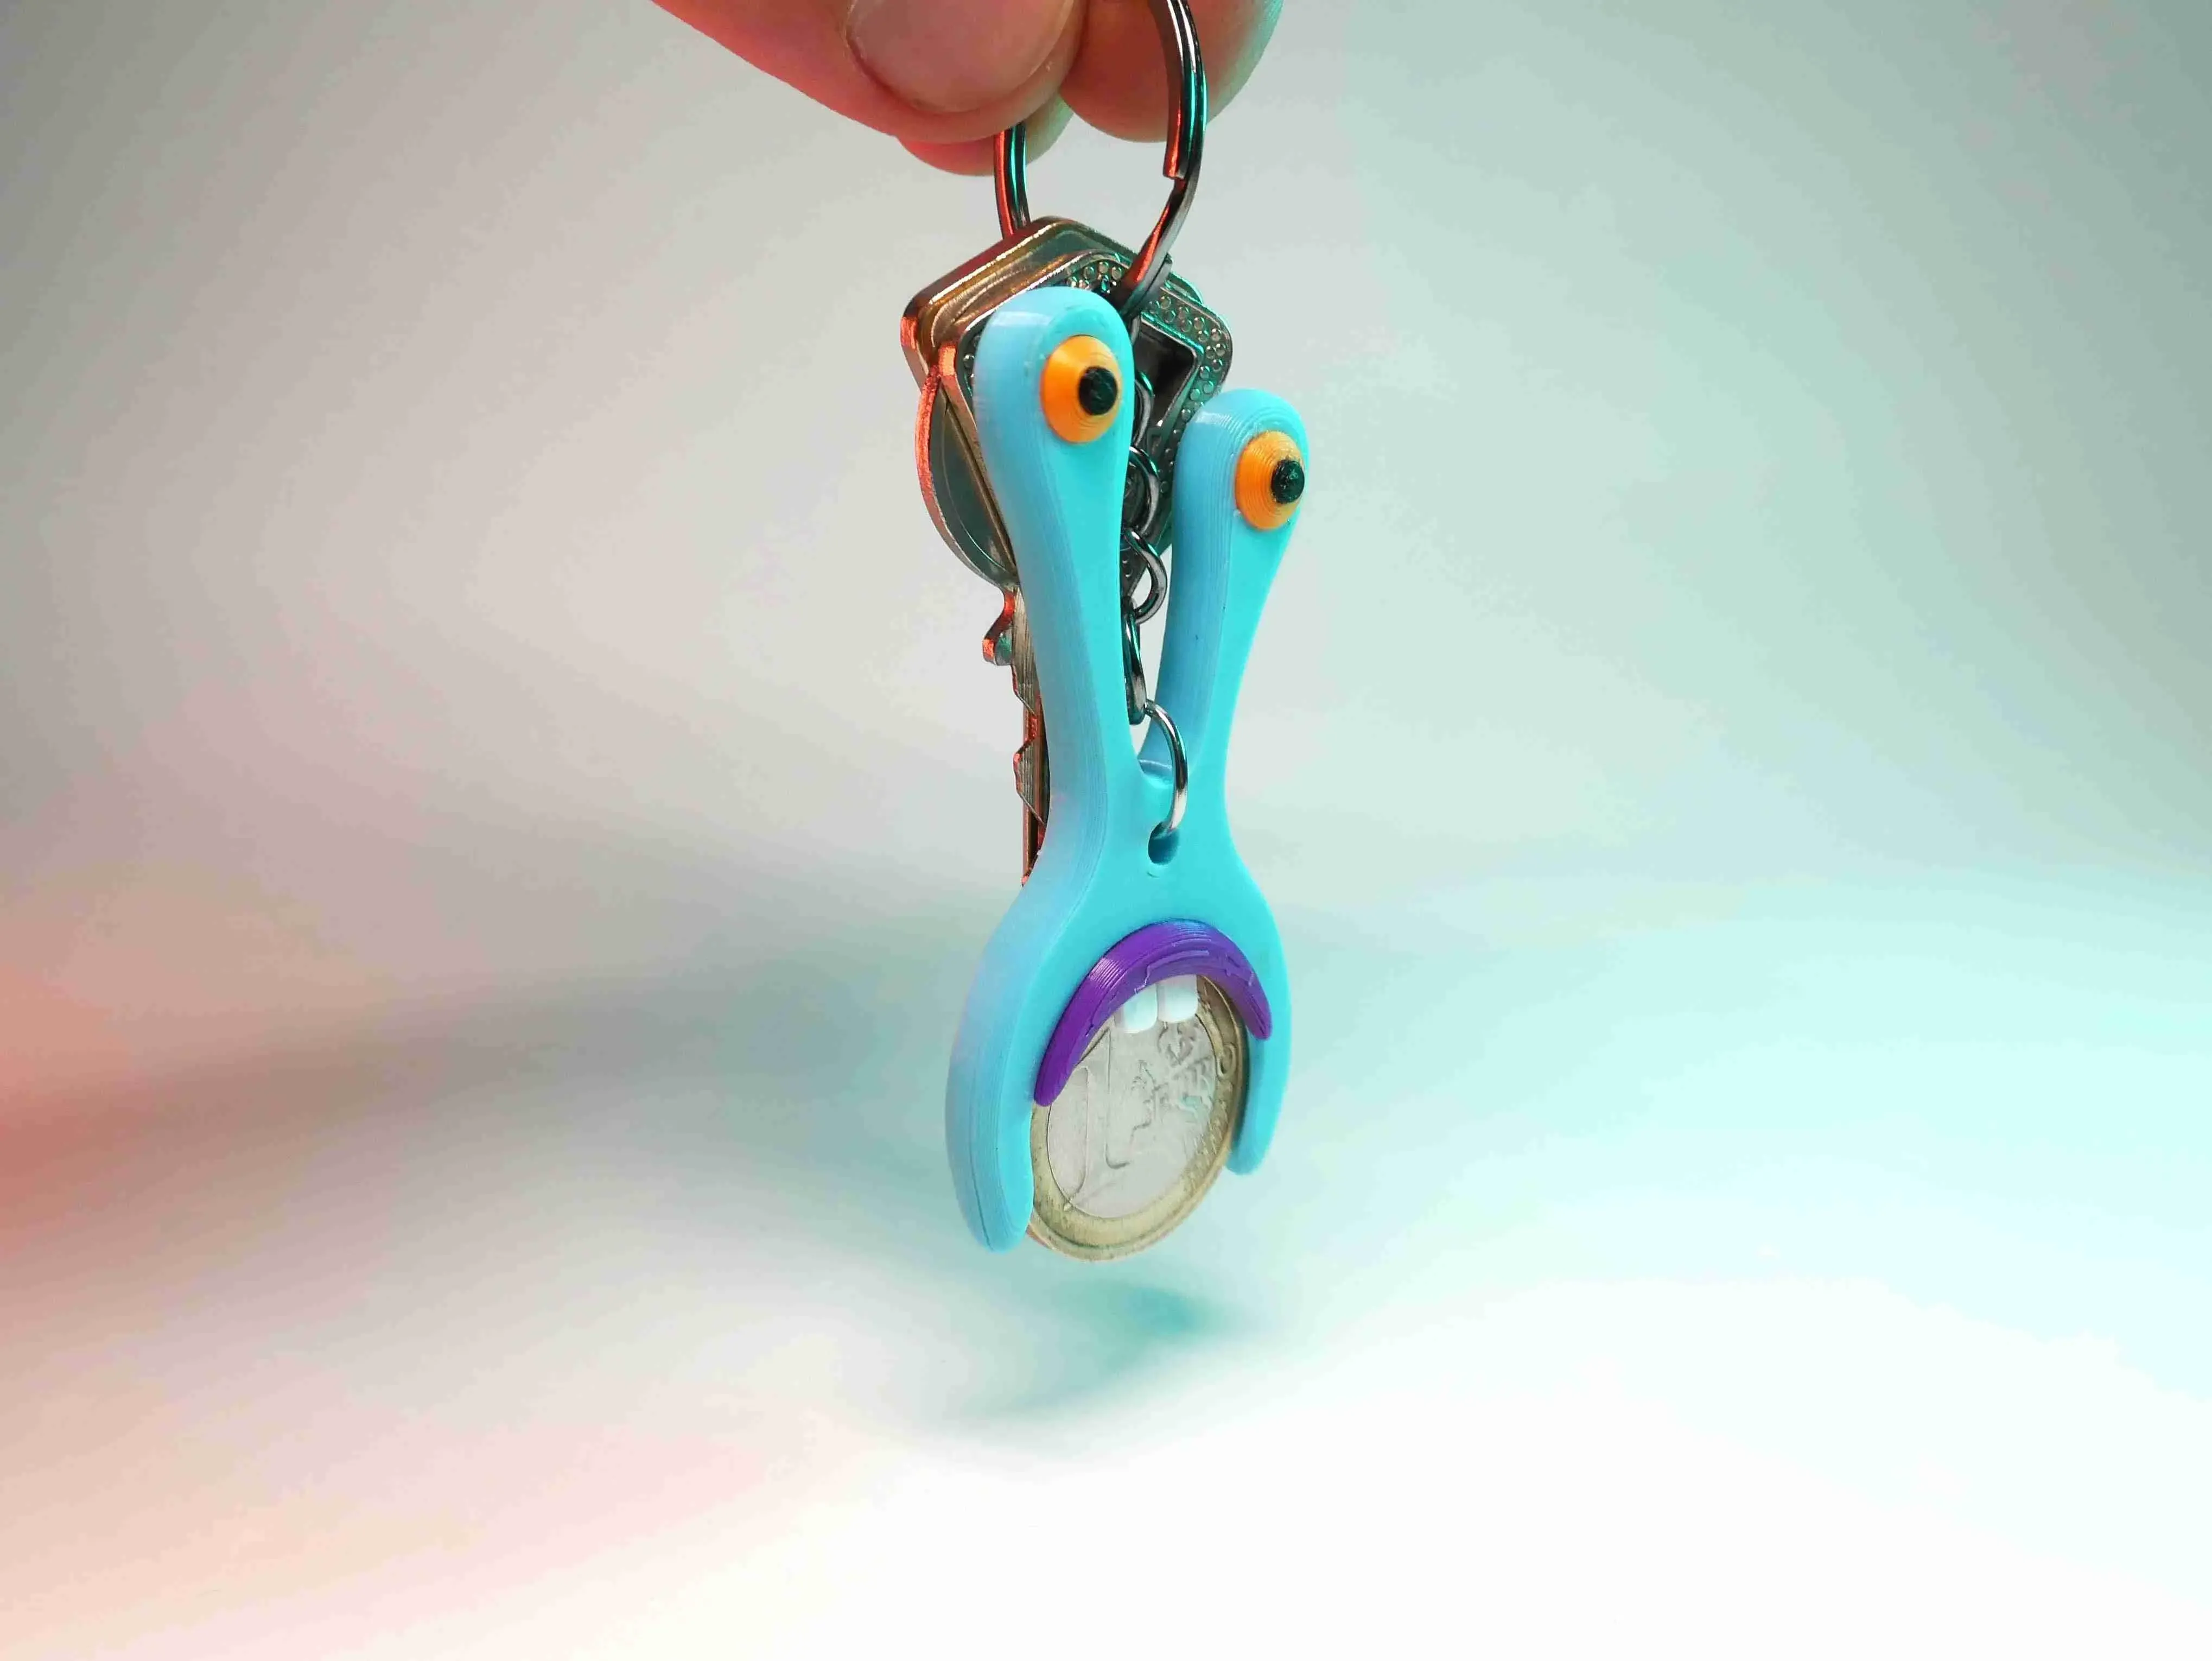 AN AMOEBA-SHAPED KEYCHAIN, SUITABLE FOR 1 AND 2 EURO COINS